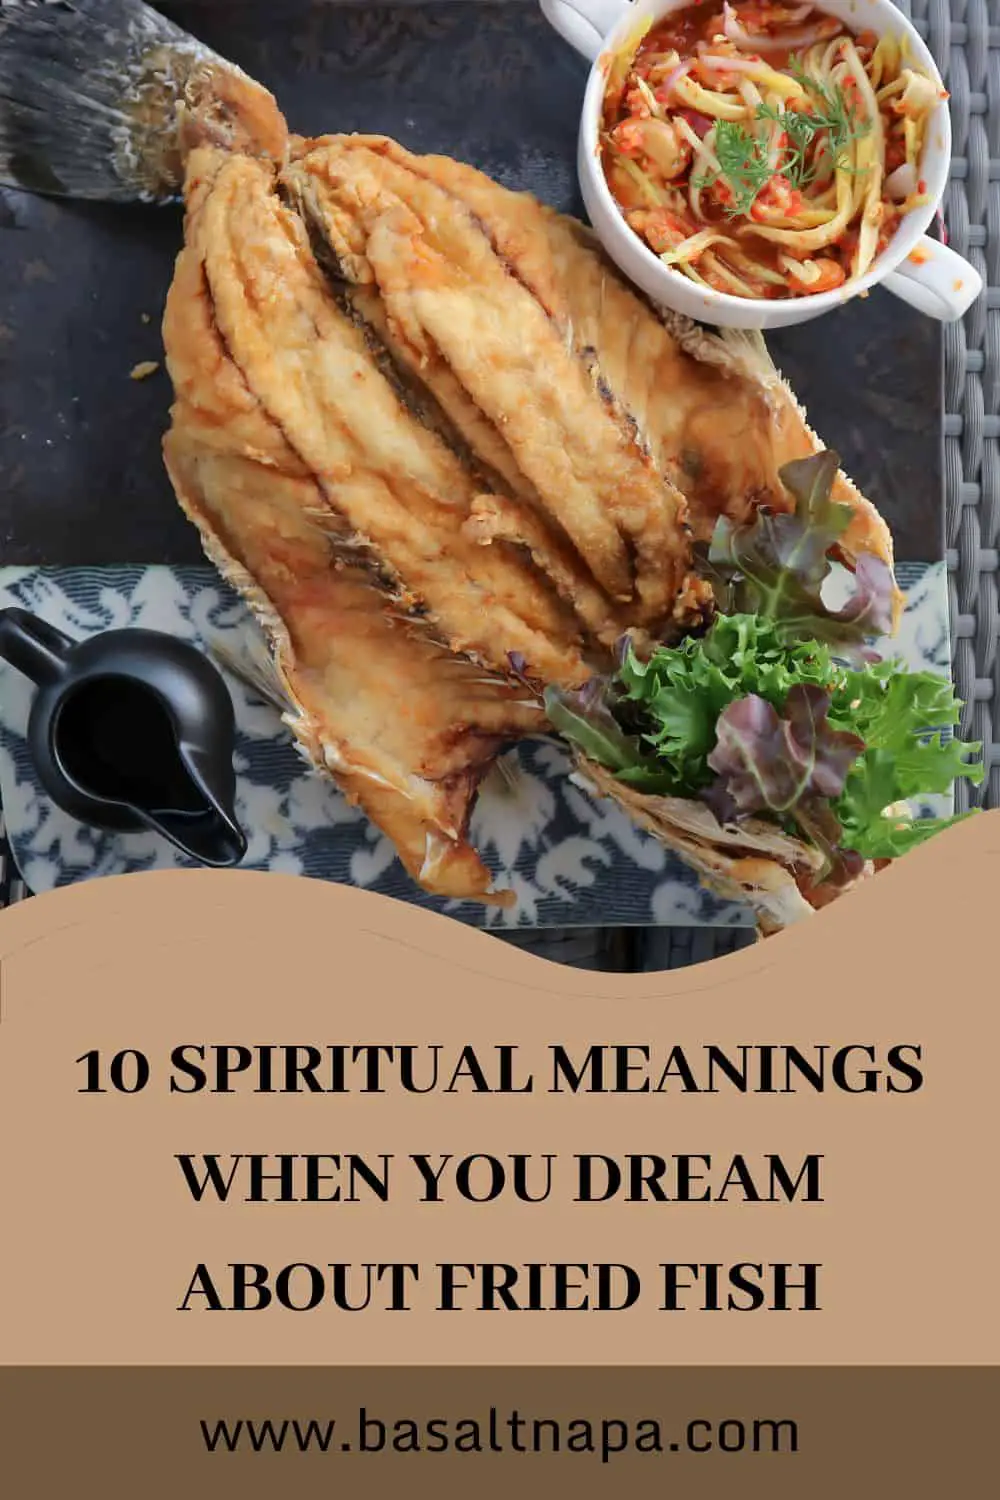 The Symbolism Of Fried Fish In Dreams